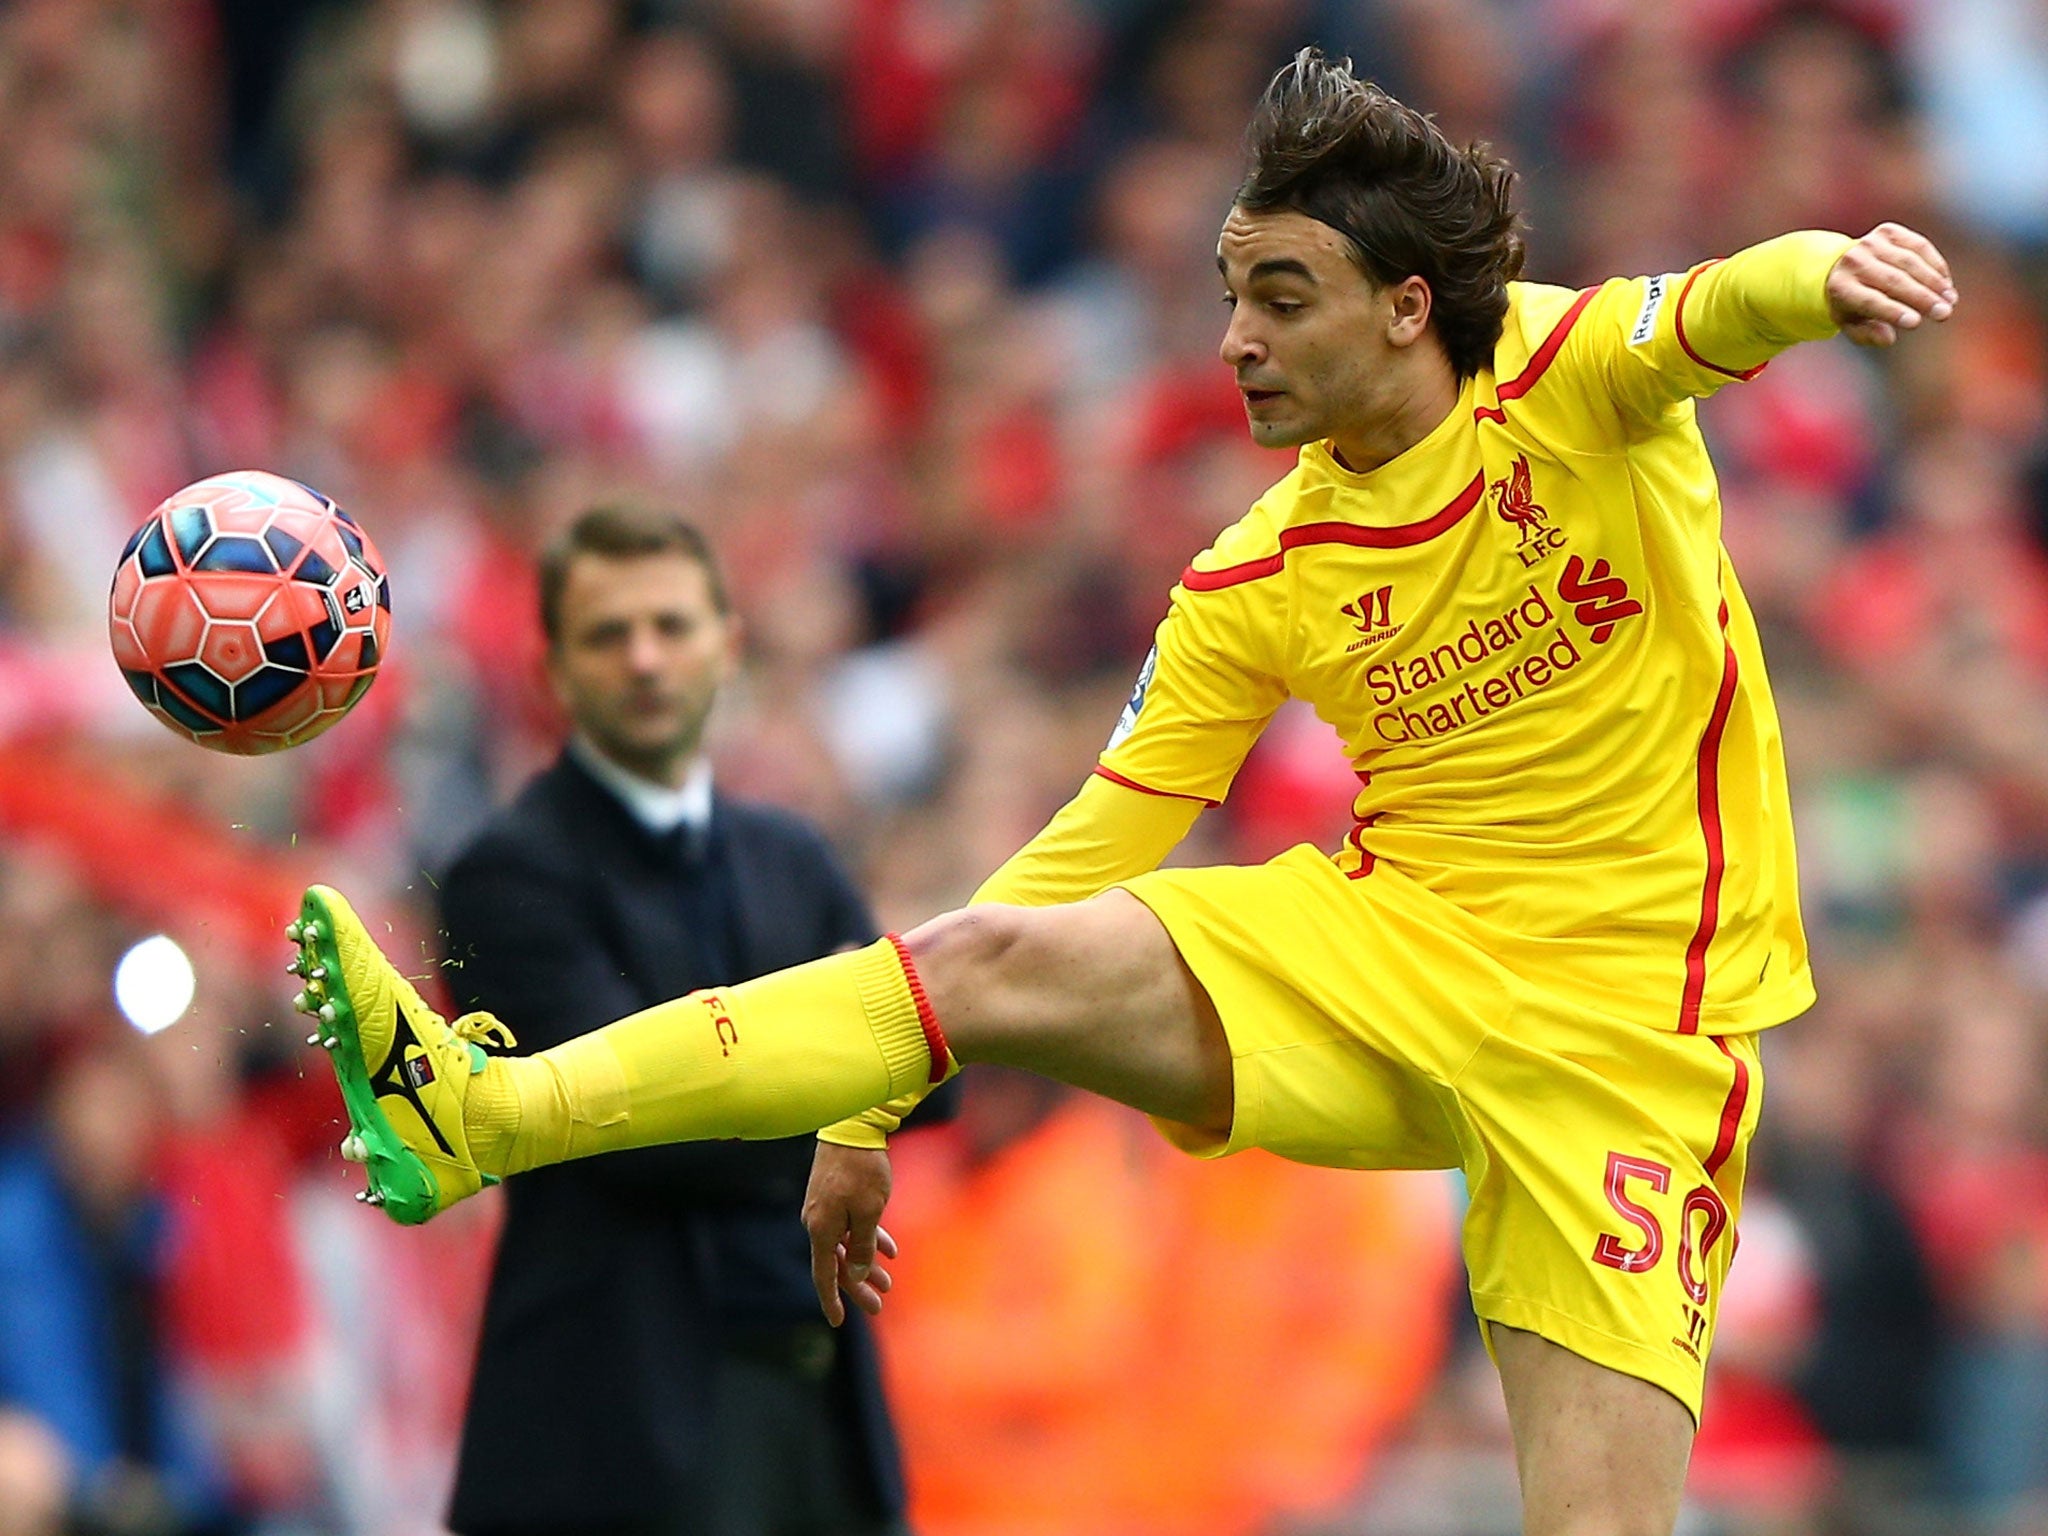 Lazar Markovic in action for Liverpool